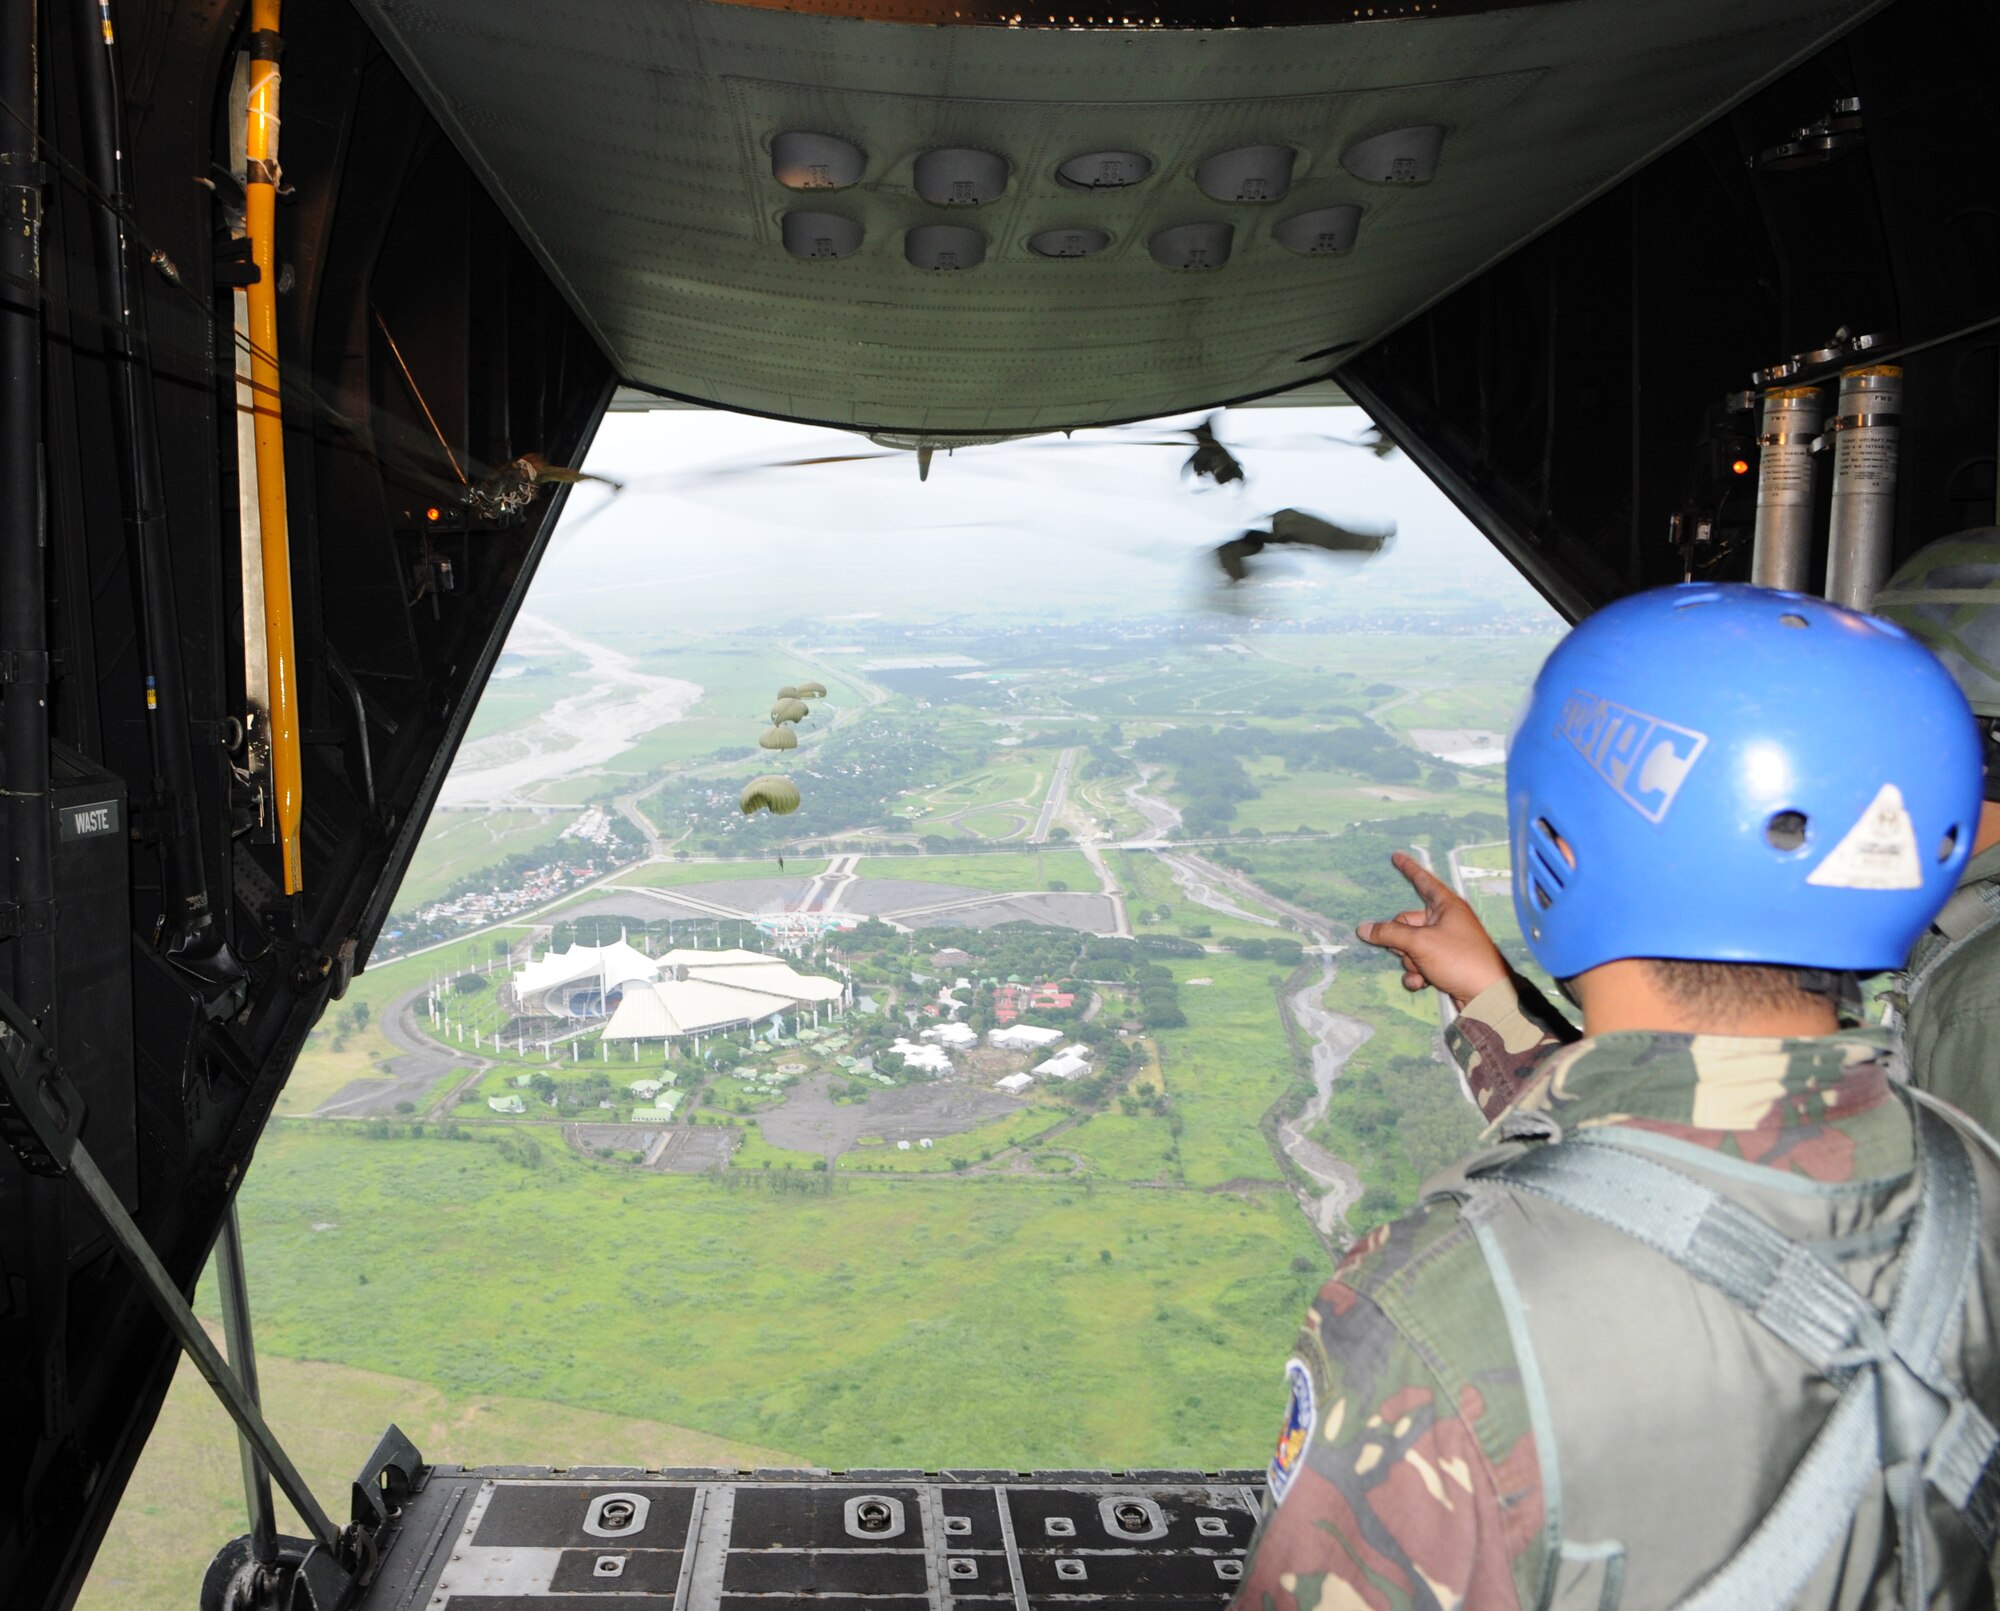 CLARK AIR BASE, Philippines -- A jumpmaster from the Philippine Air Force counts parachutes opening after a static-line personnel drop from a 17th Special Operations Squadron MC-130P Combat Shadow here June 19.  About 90 members from the 353rd Special Operations Group trained with the Philippine Air Force June 15-26 during Teak Piston 09-2, a training exchange designed to enhance U.S and Philippine military training, capabilities and increase interoperability. (U.S. Air Force Photo by Tech. Sgt. Aaron Cram)